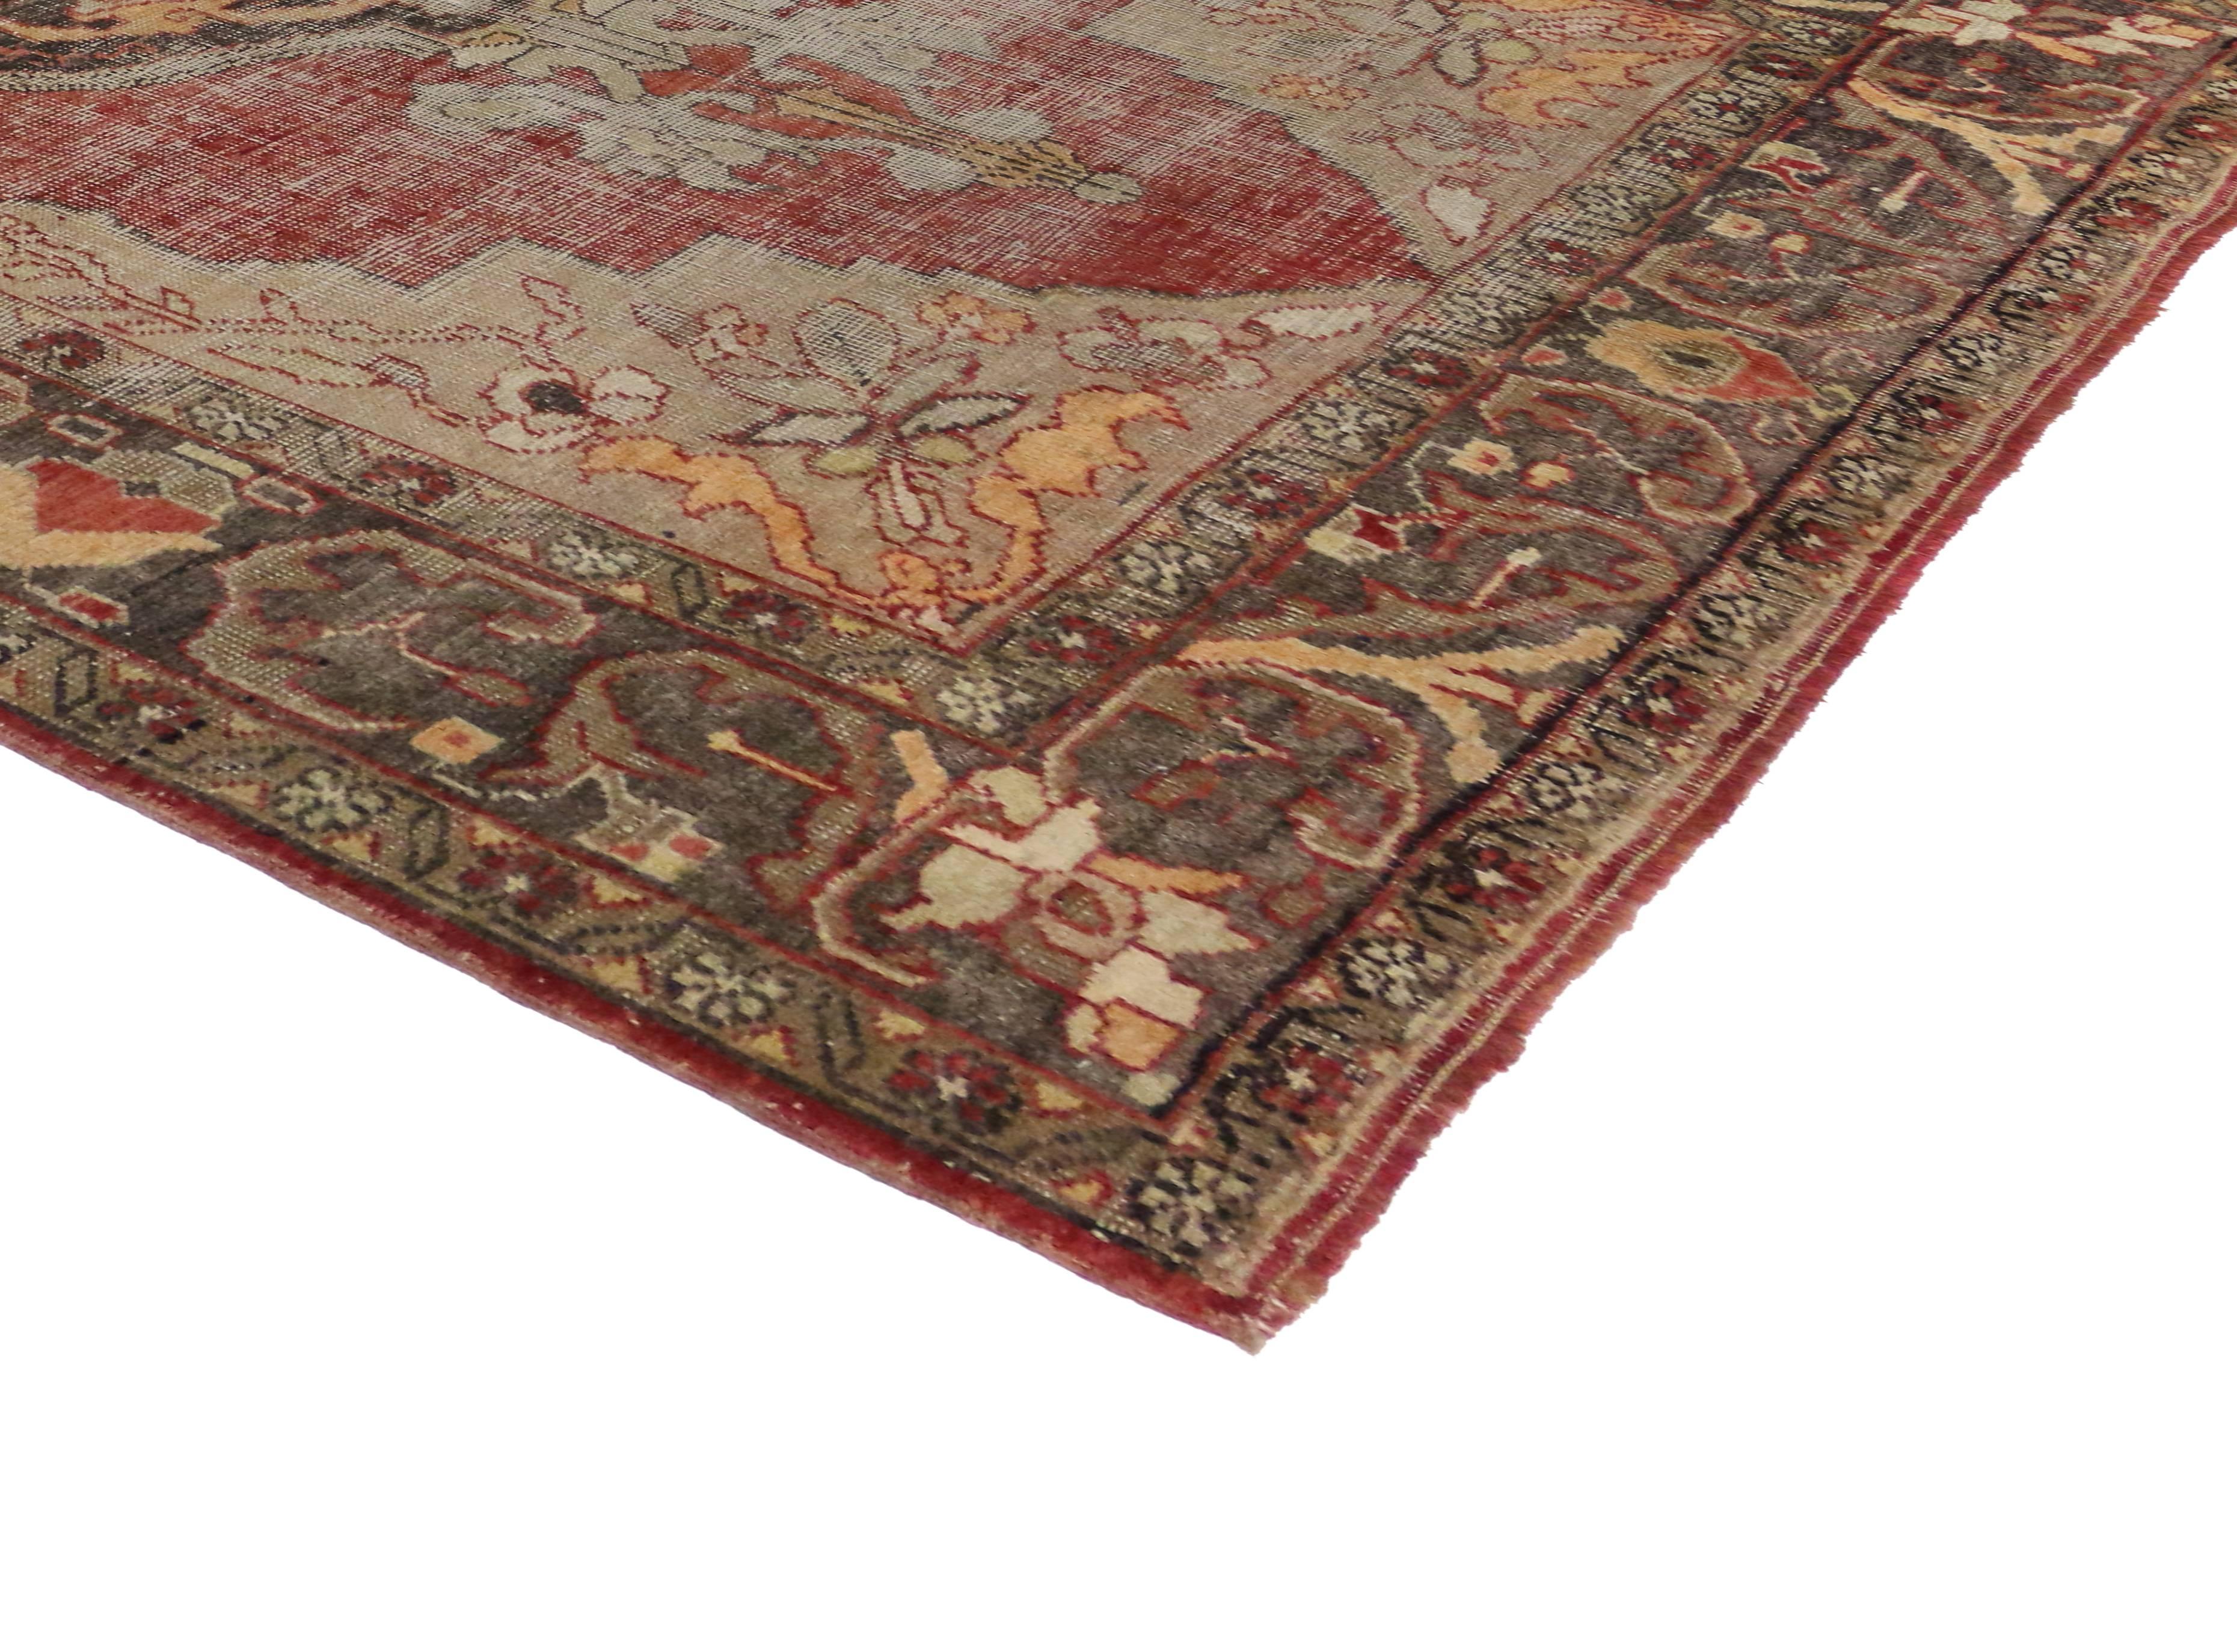 Distressed Vintage Turkish Oushak Rug with Rustic English Manor Style  For Sale 2